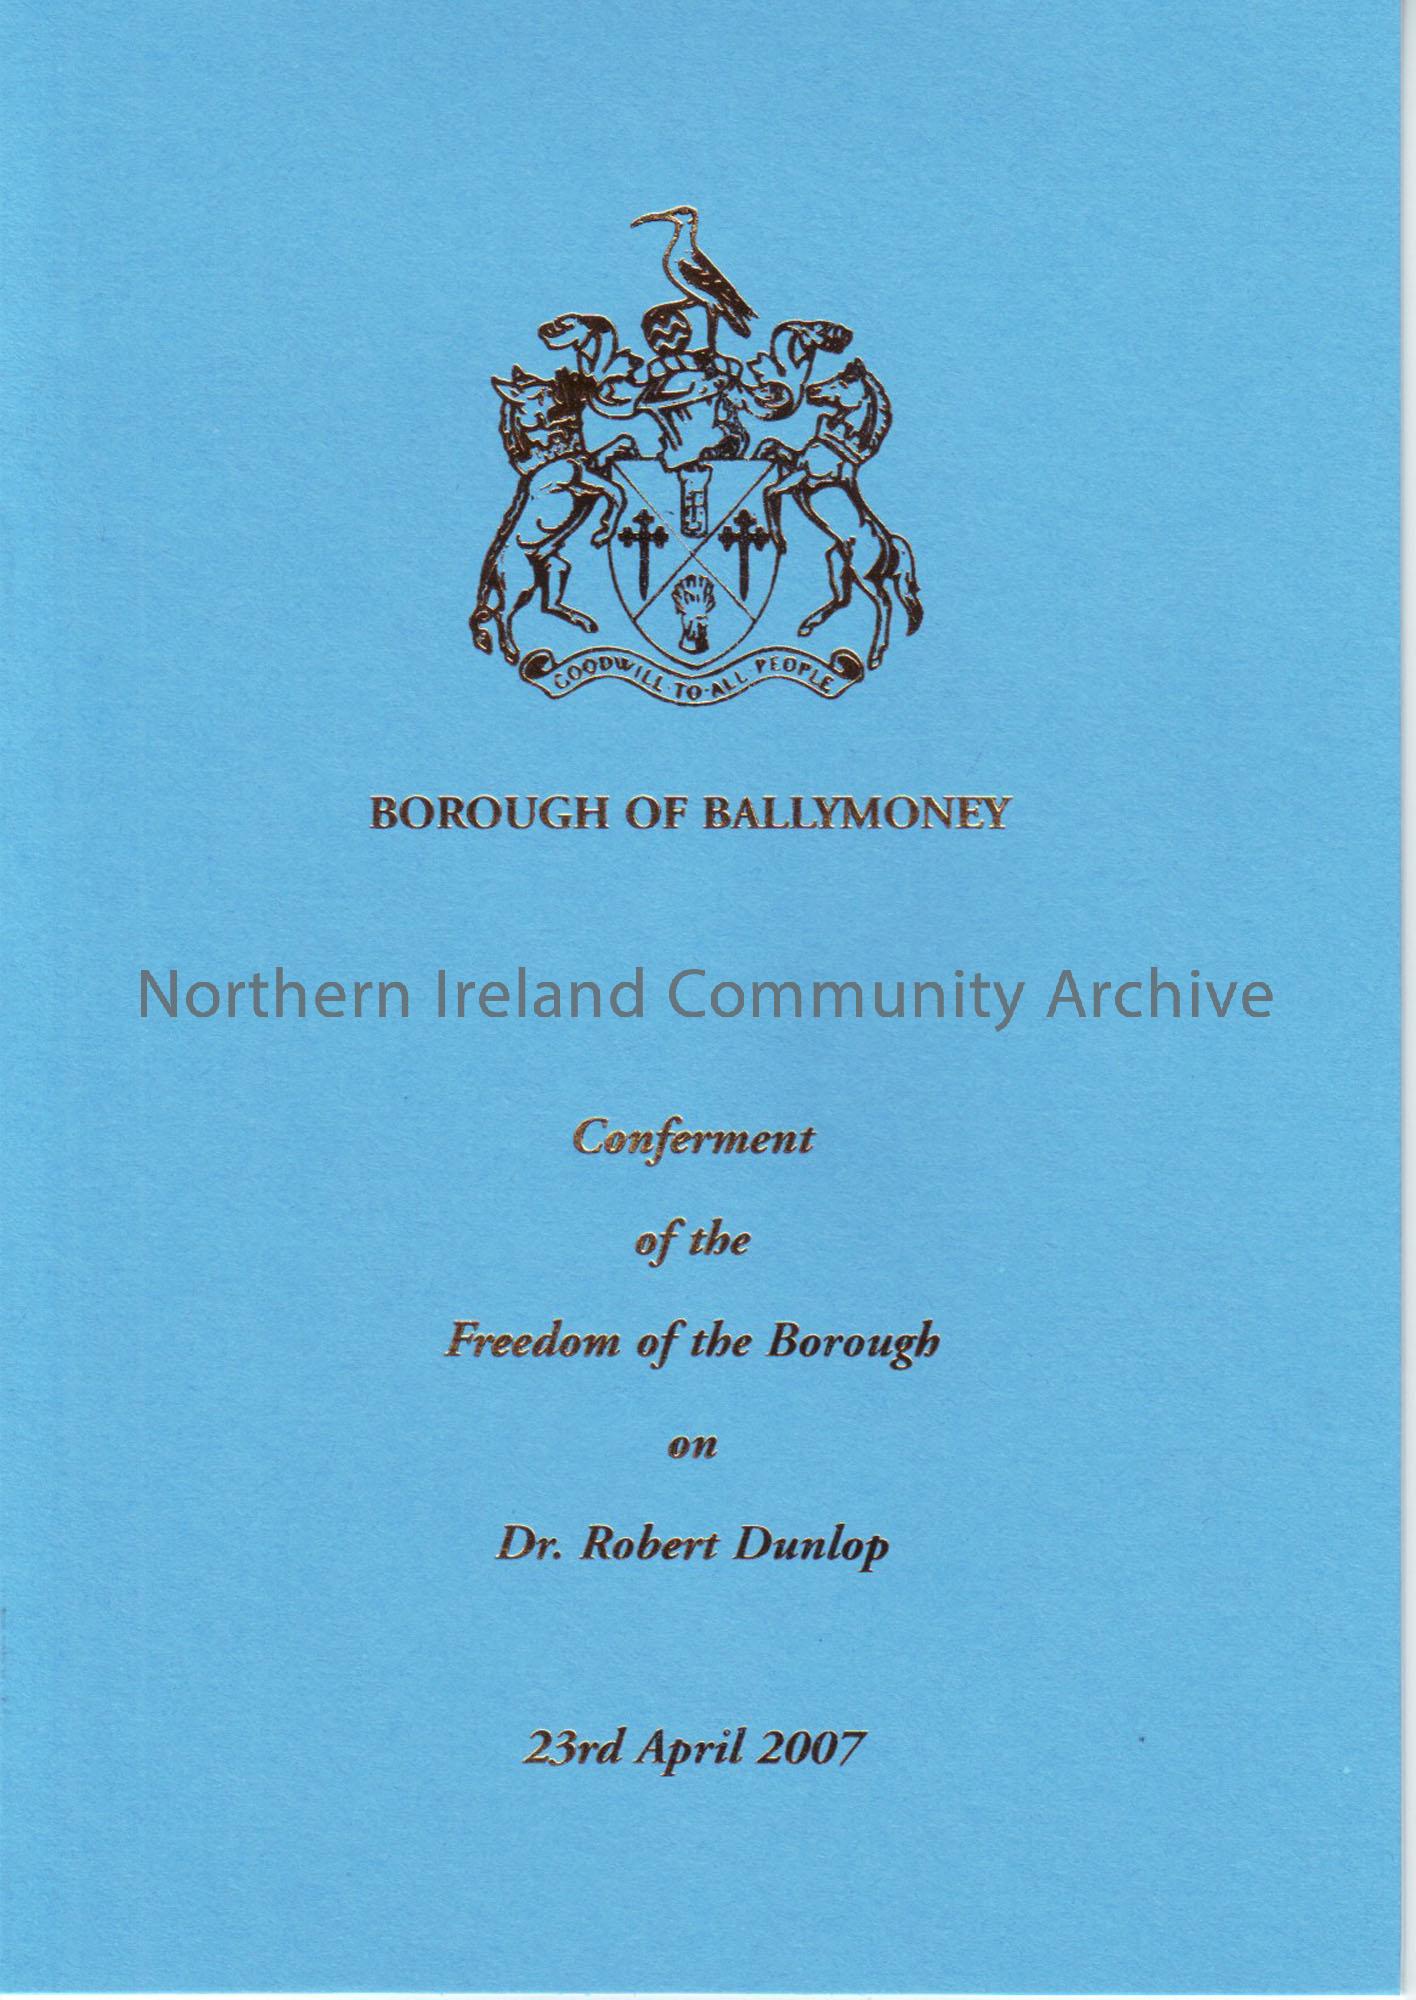 Borough of Ballymoney conferment of the Freedom of the Borough on Dr. Robert Dunlop 23rd April 2007.